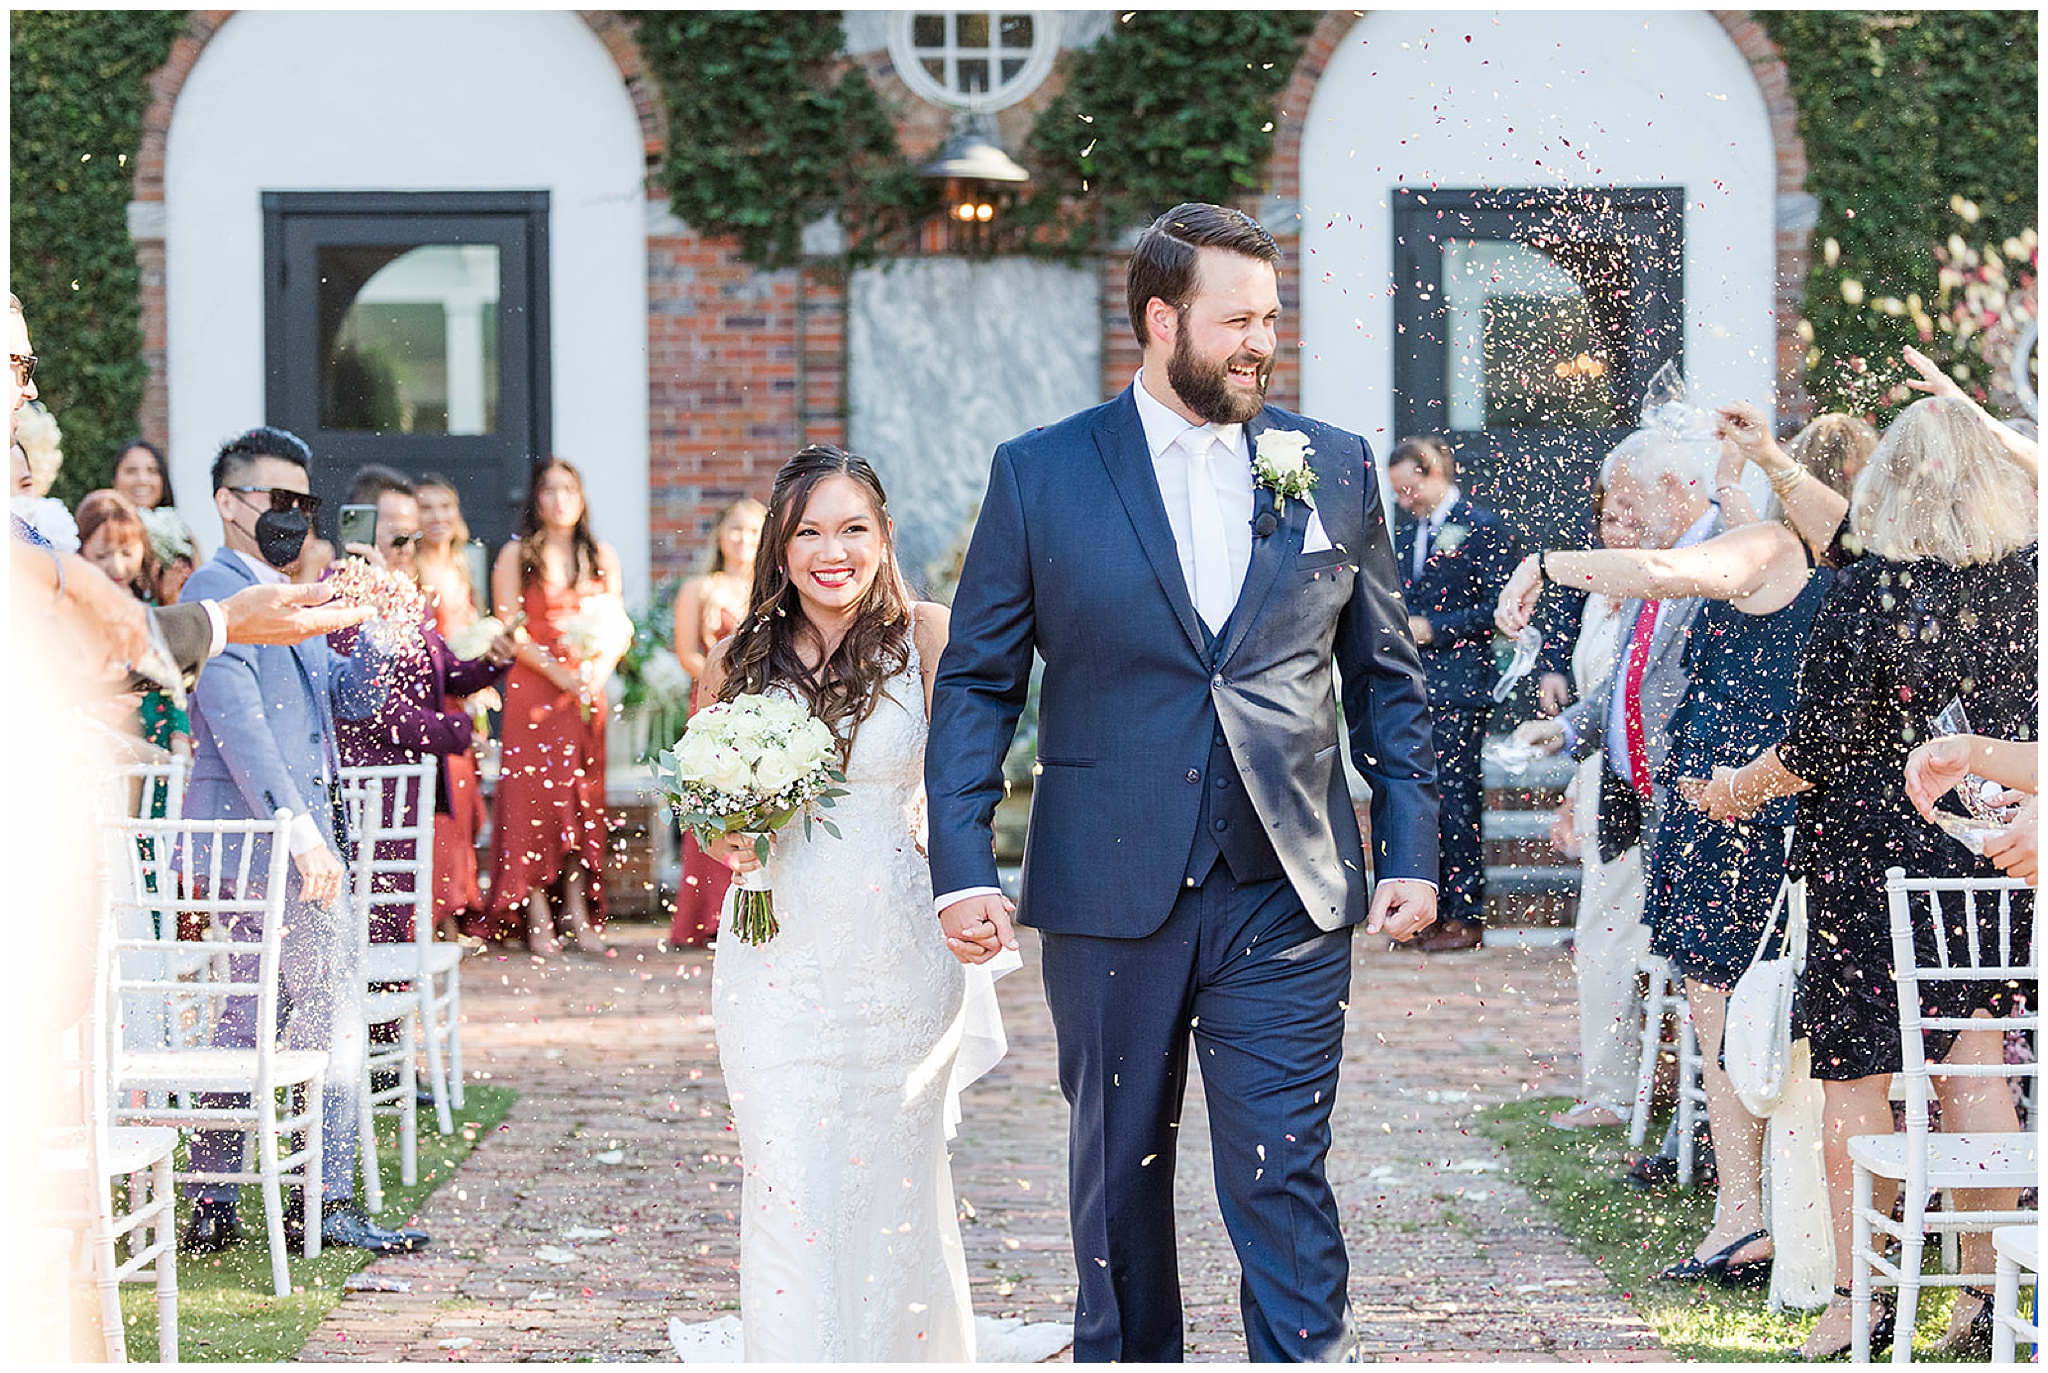 Newlyweds walk down the brick path aisle of their wedding ceremony while guests celebrate by throwing confetti over them at south eden plantation